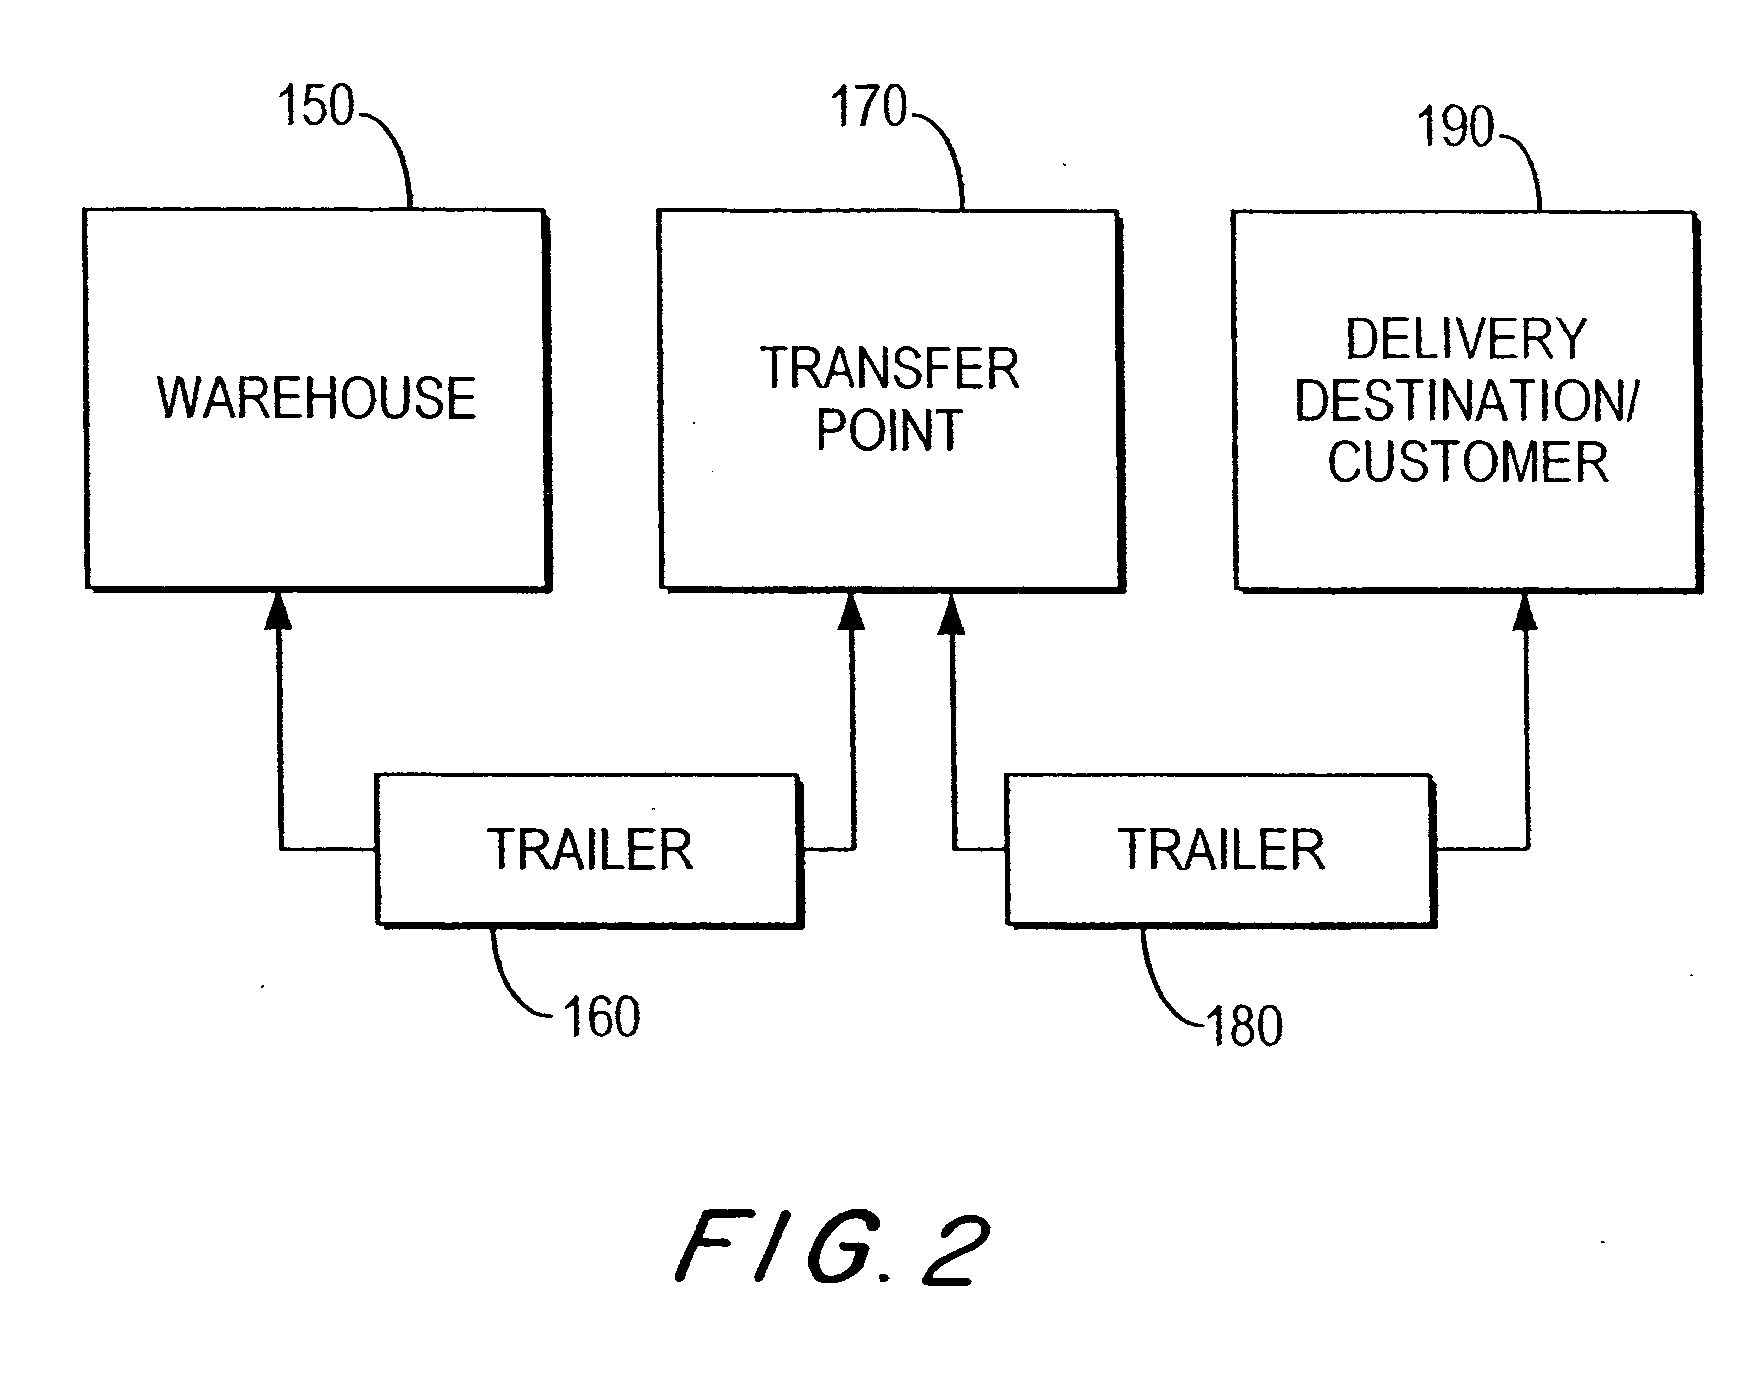 System and method of delivering groceries purchased over the internet